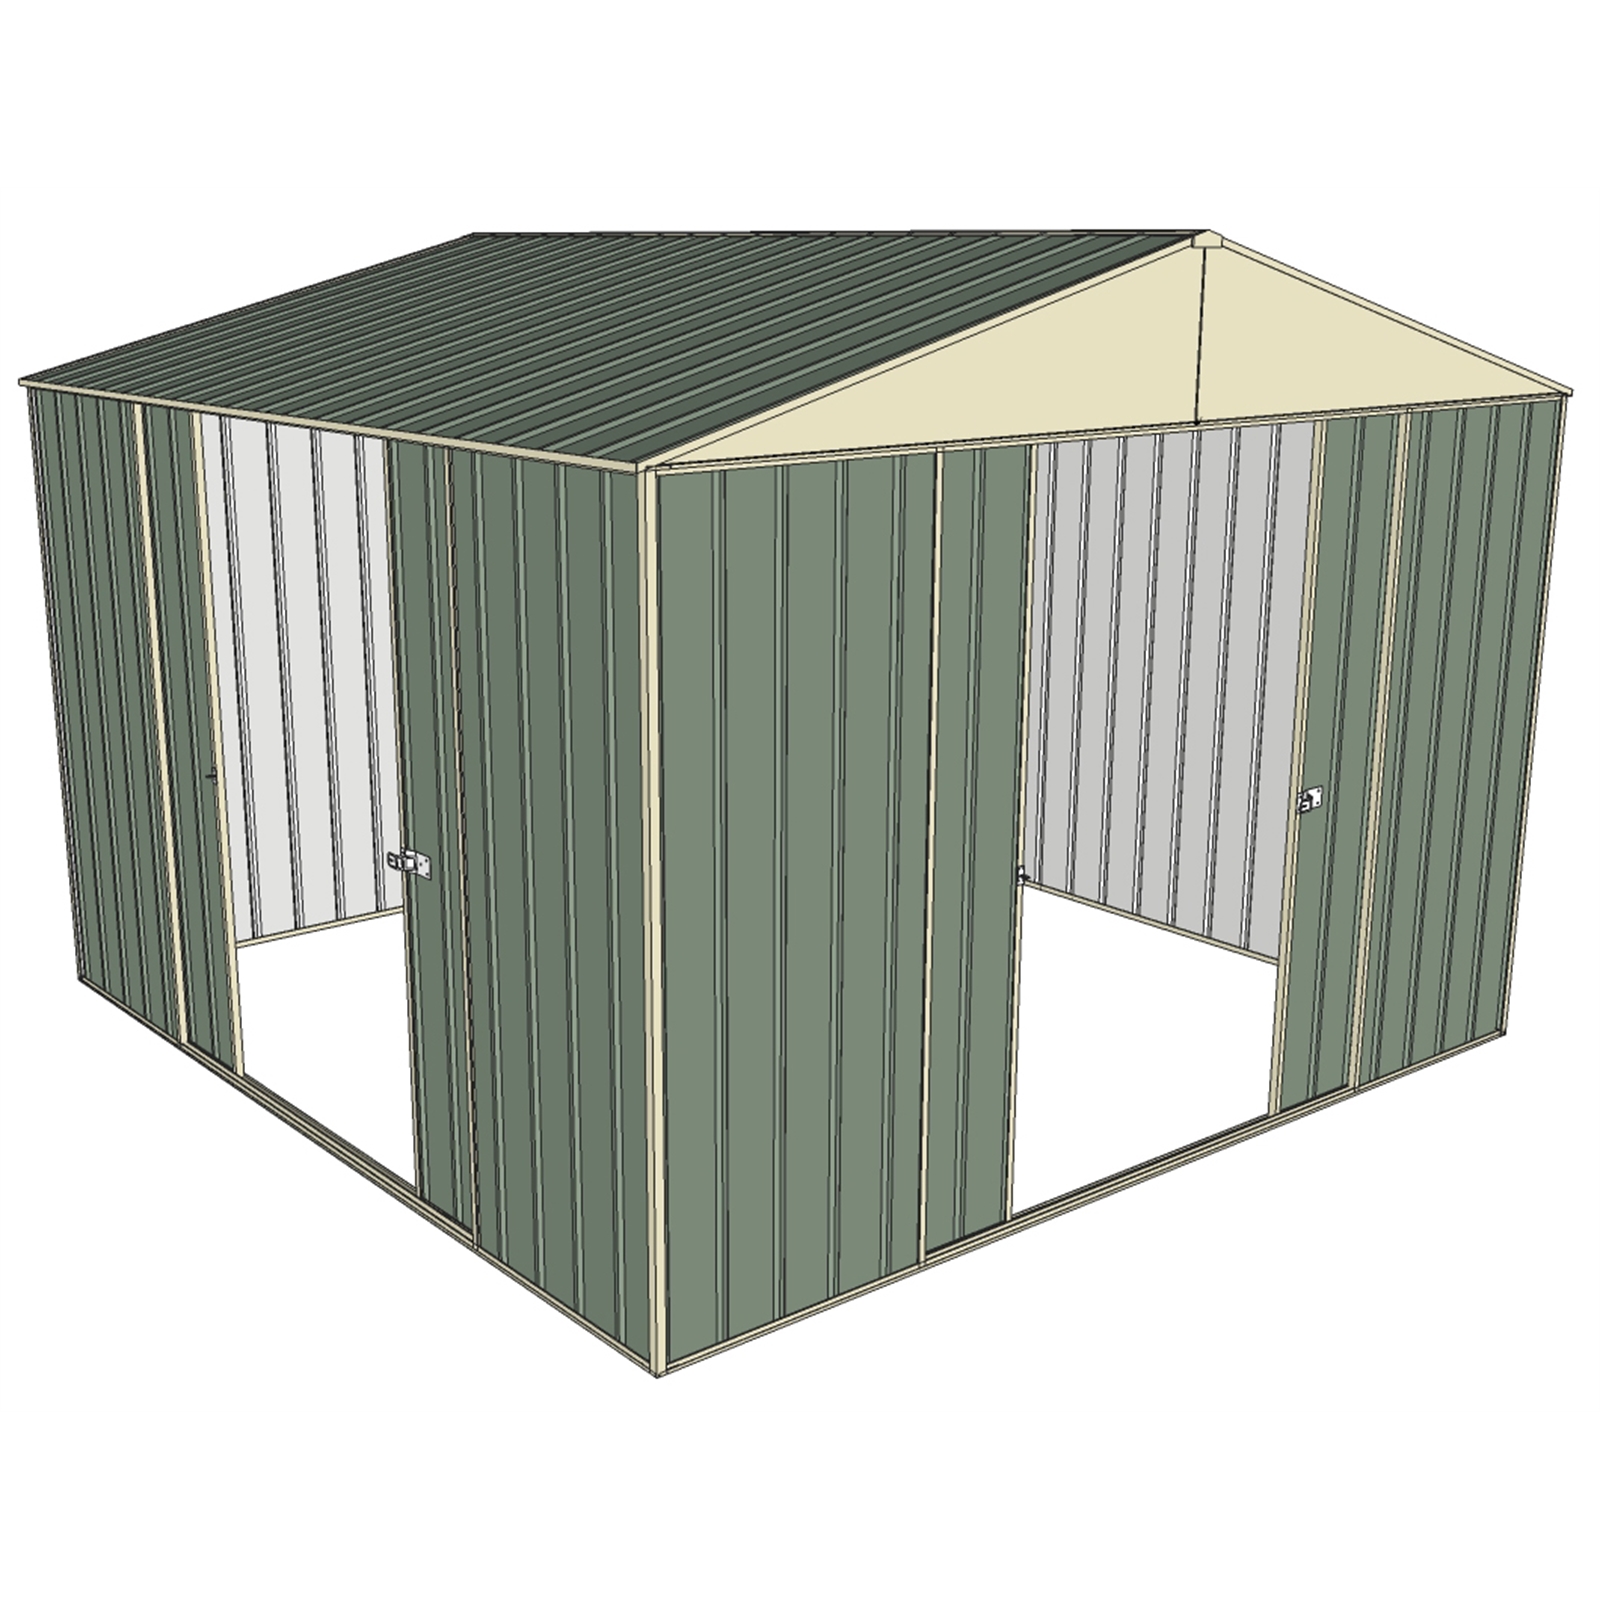 Build-a-Shed 3.0 x 2.3 x 3.0m Green Dual Double Sliding Door Shed